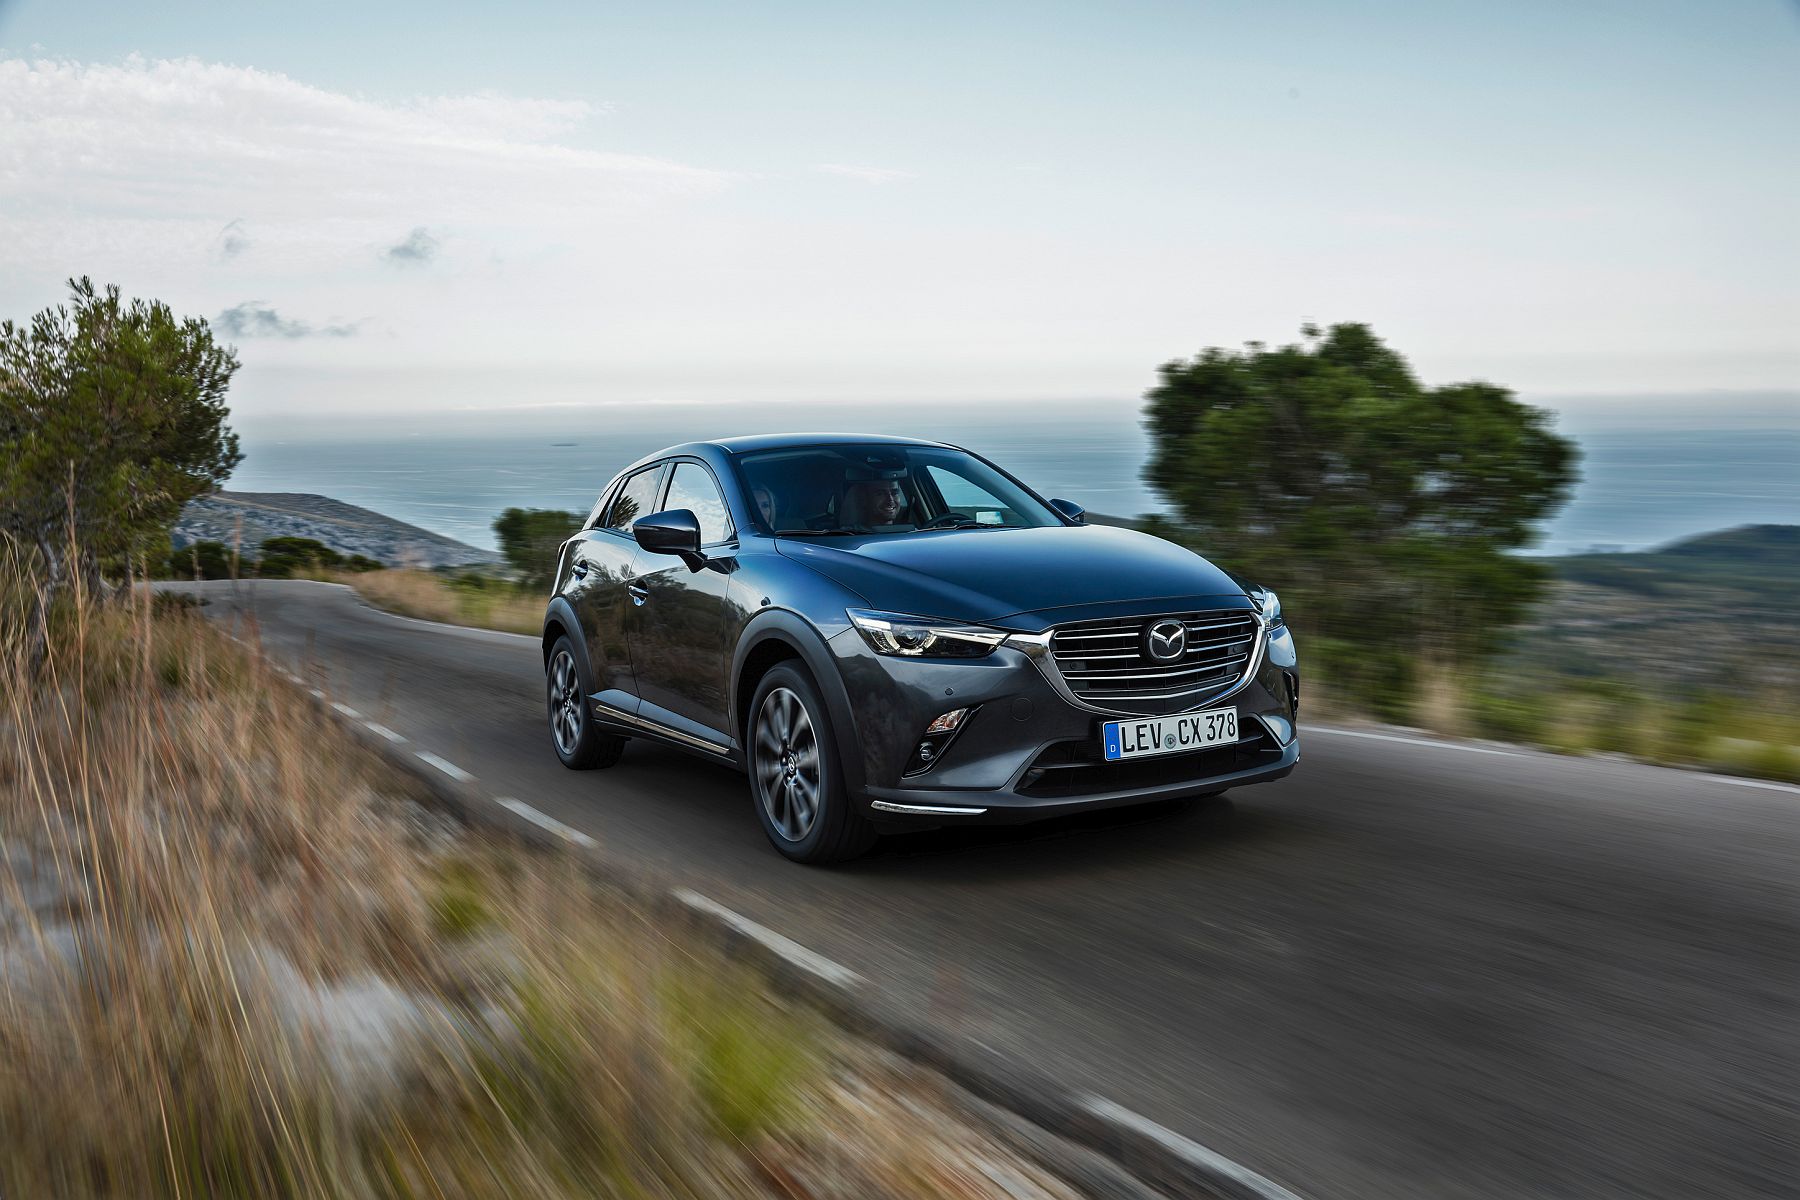 20_2018_MAZDA_CX-3_ACTION_FRONT